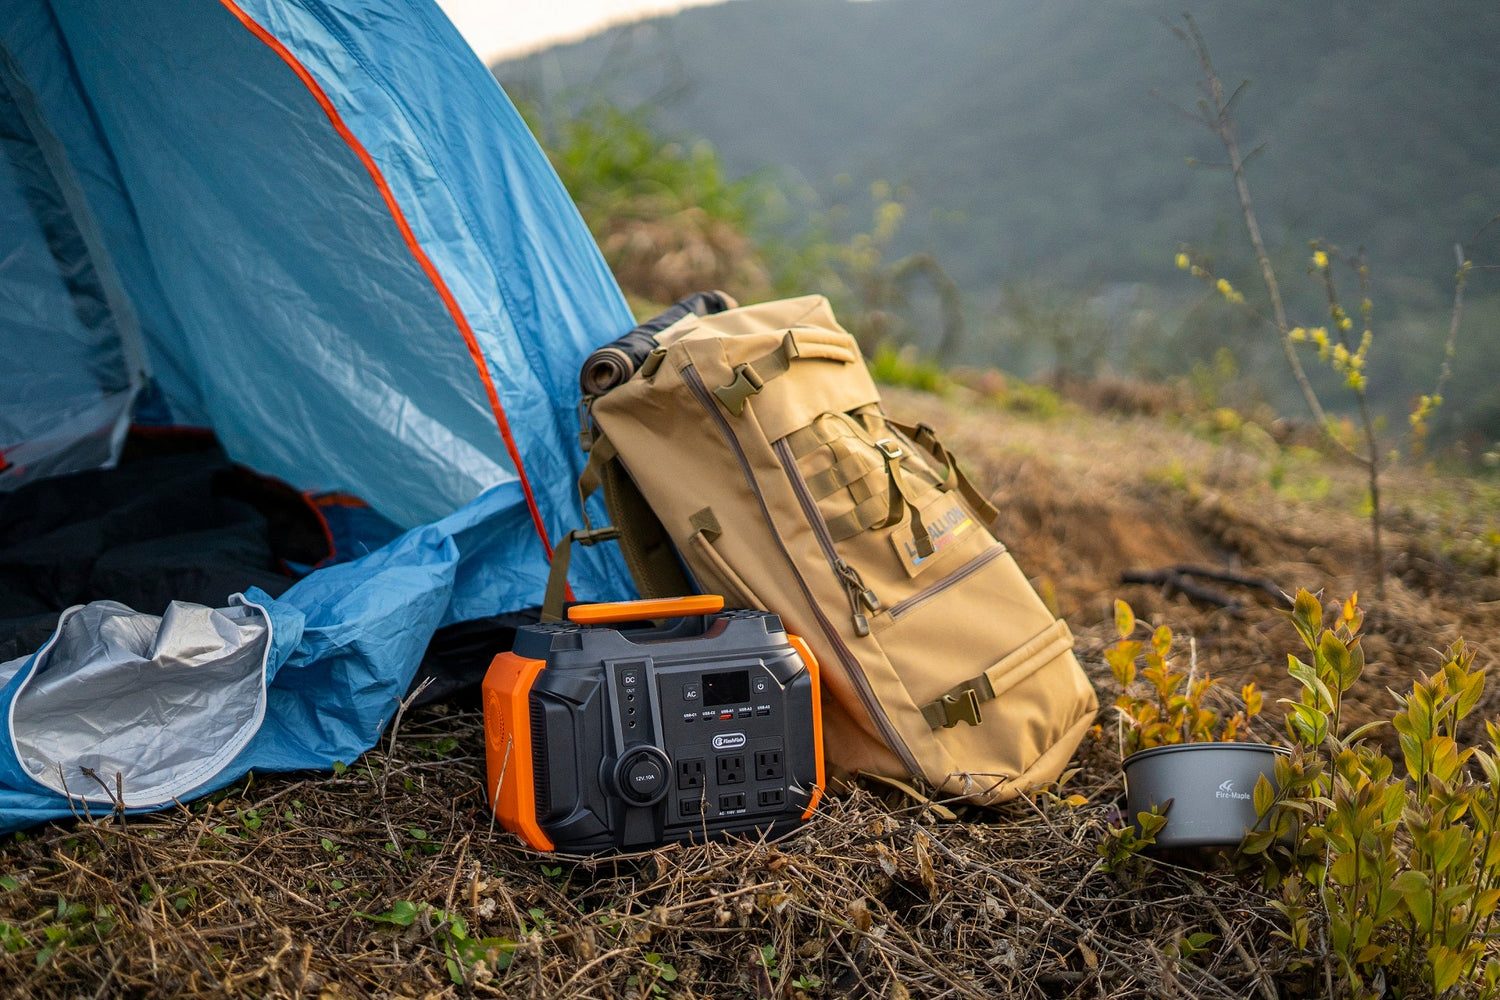 How to Choose an Outdoor Power Supply Suitable for Spring Camping? - flashfishsolargenerator